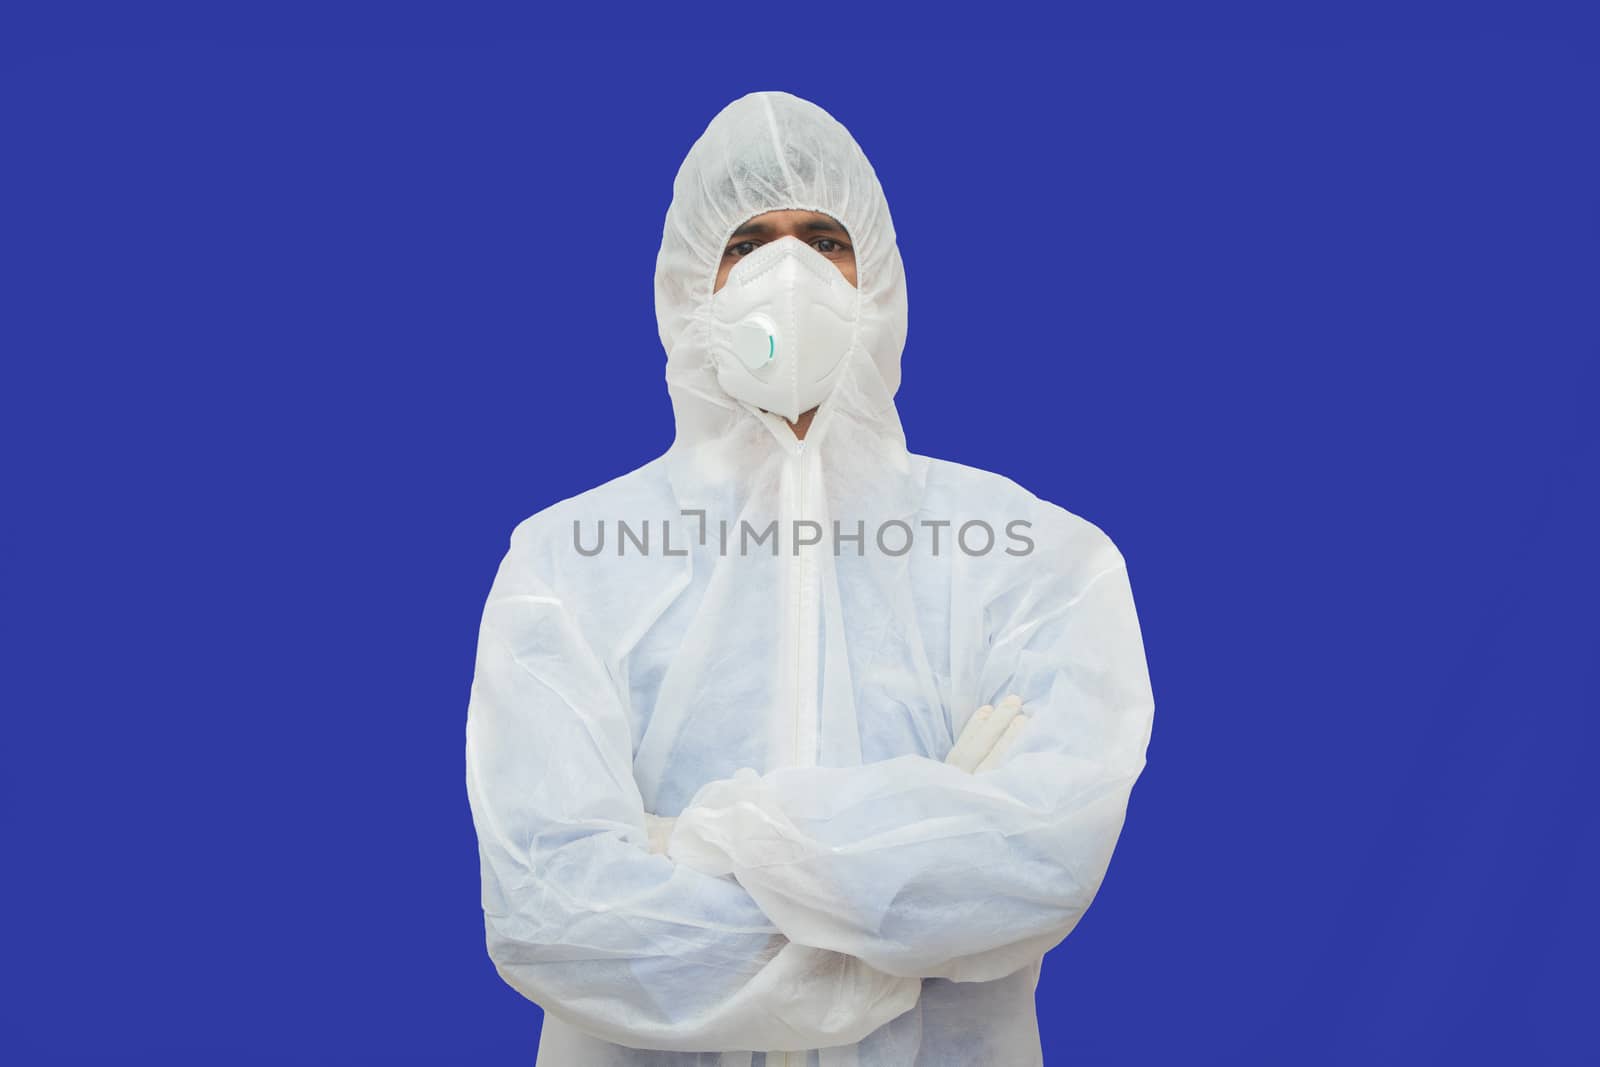 Confident epidemiologist in hazmat suit with medical face mask - Concept to fight covid-19 or coronavirus outbreak by controlling virus spread. by lakshmiprasad.maski@gmai.com